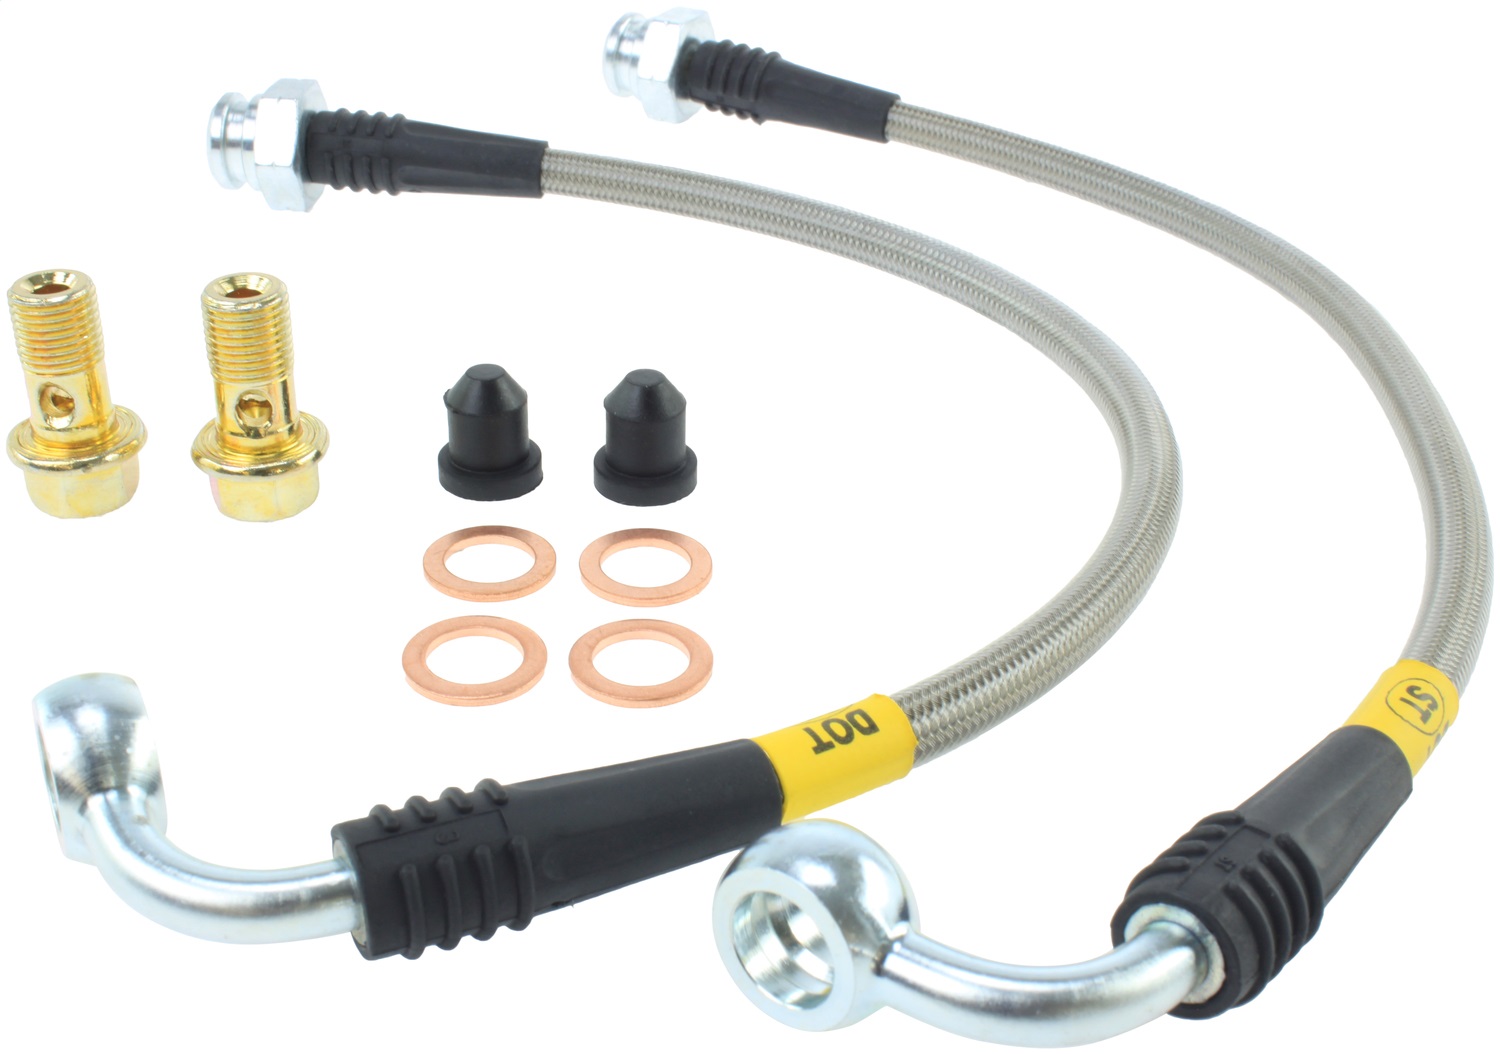 StopTech 950.42503 Stainless Steel Hose Set Fits 350Z 370Z G25 G35 G37 M35 M45